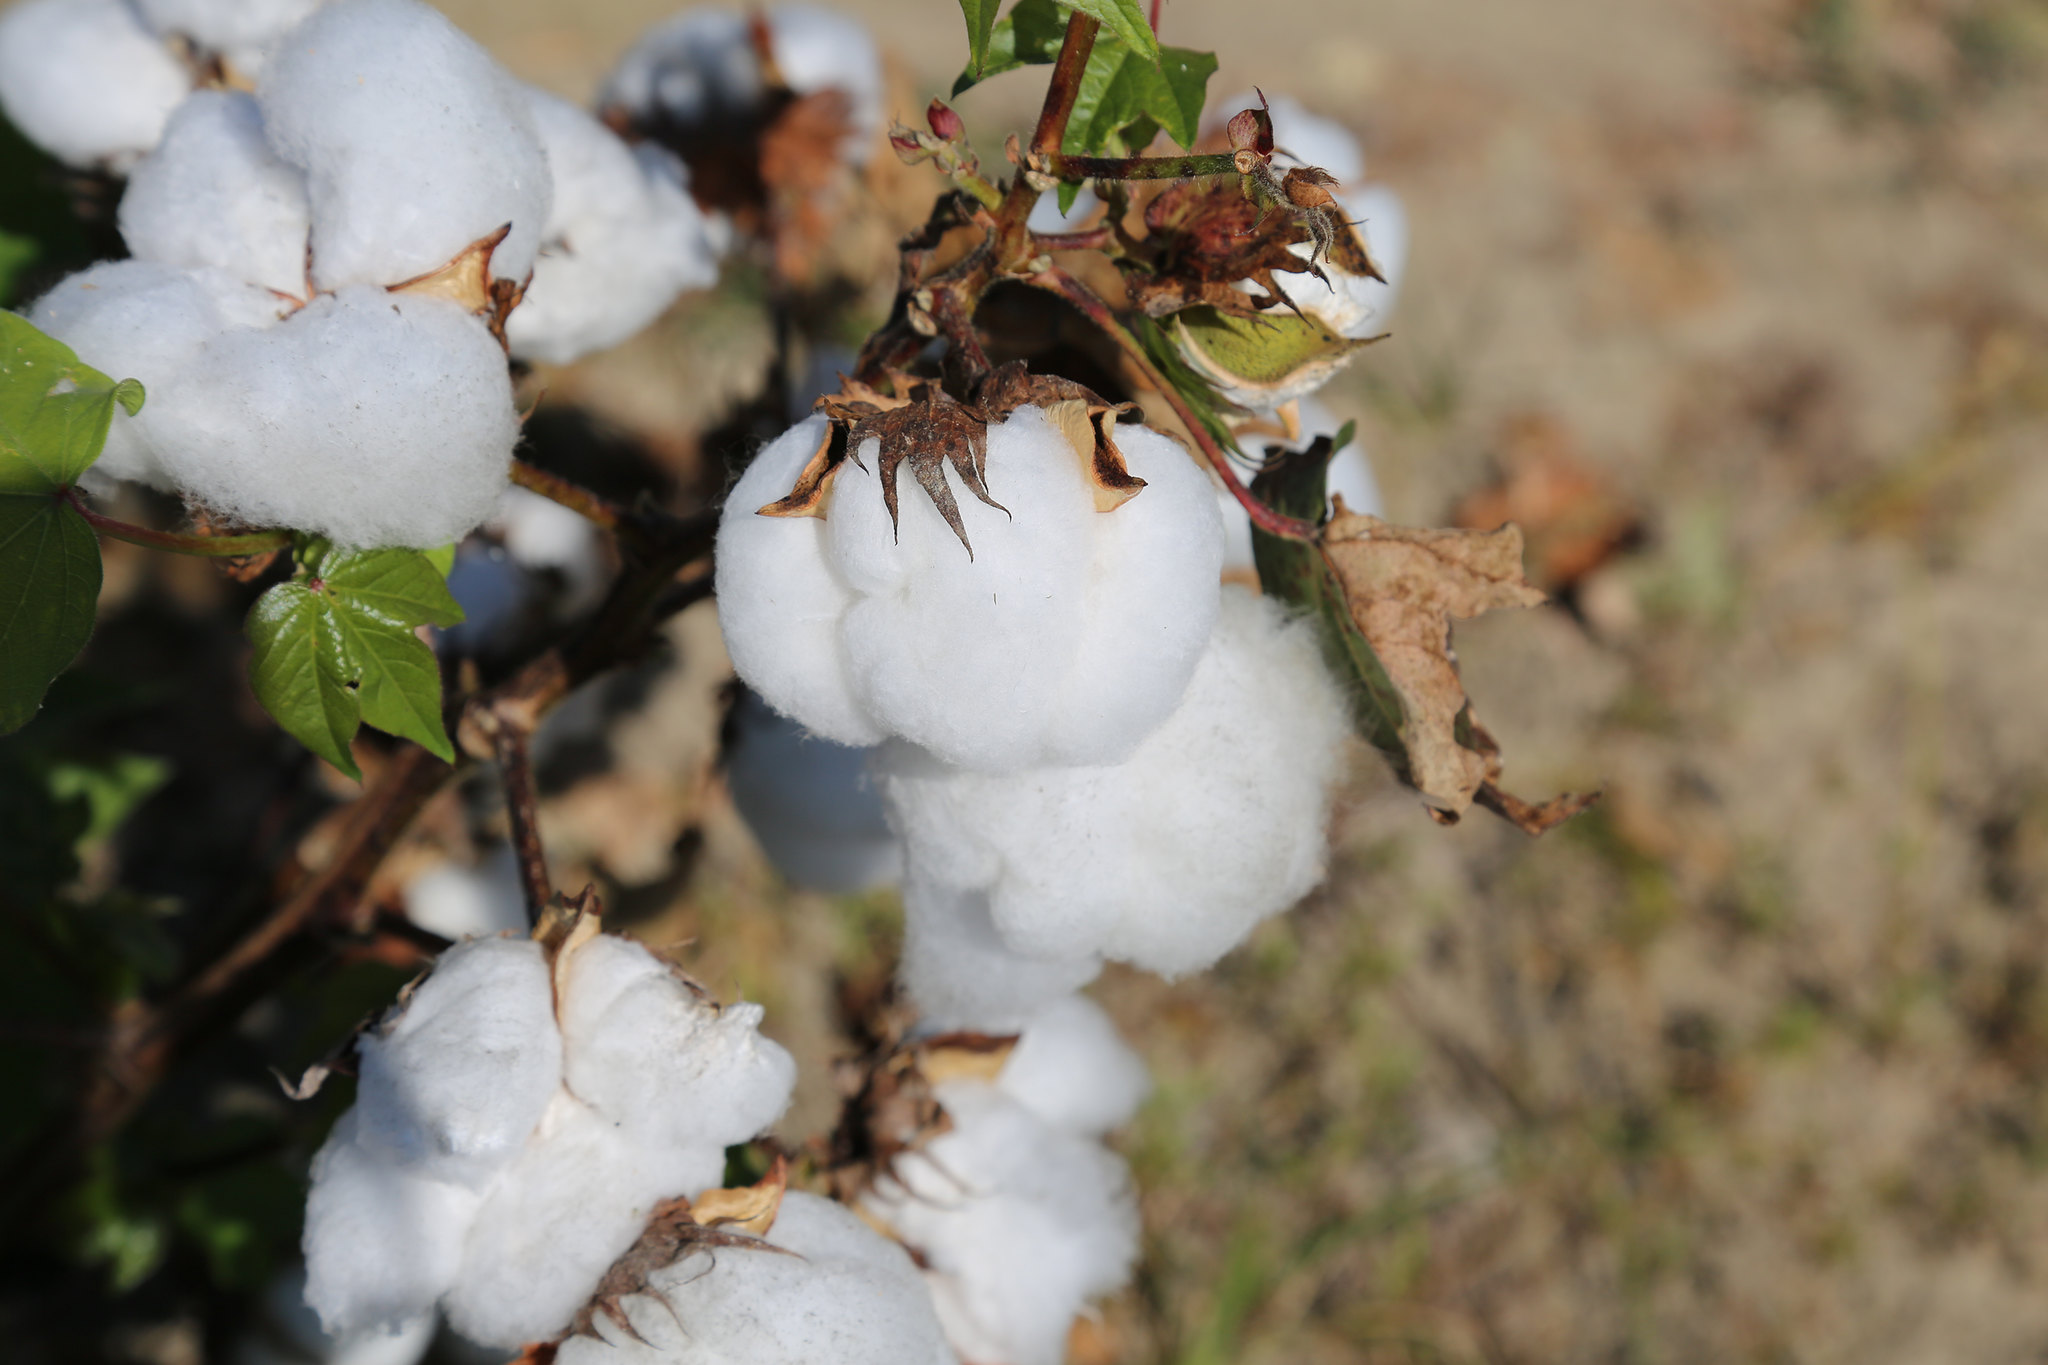 The U.S. planted acreage for cotton was forecast at 12.2 million acres, down 11% (1.5 million acres) from last year.